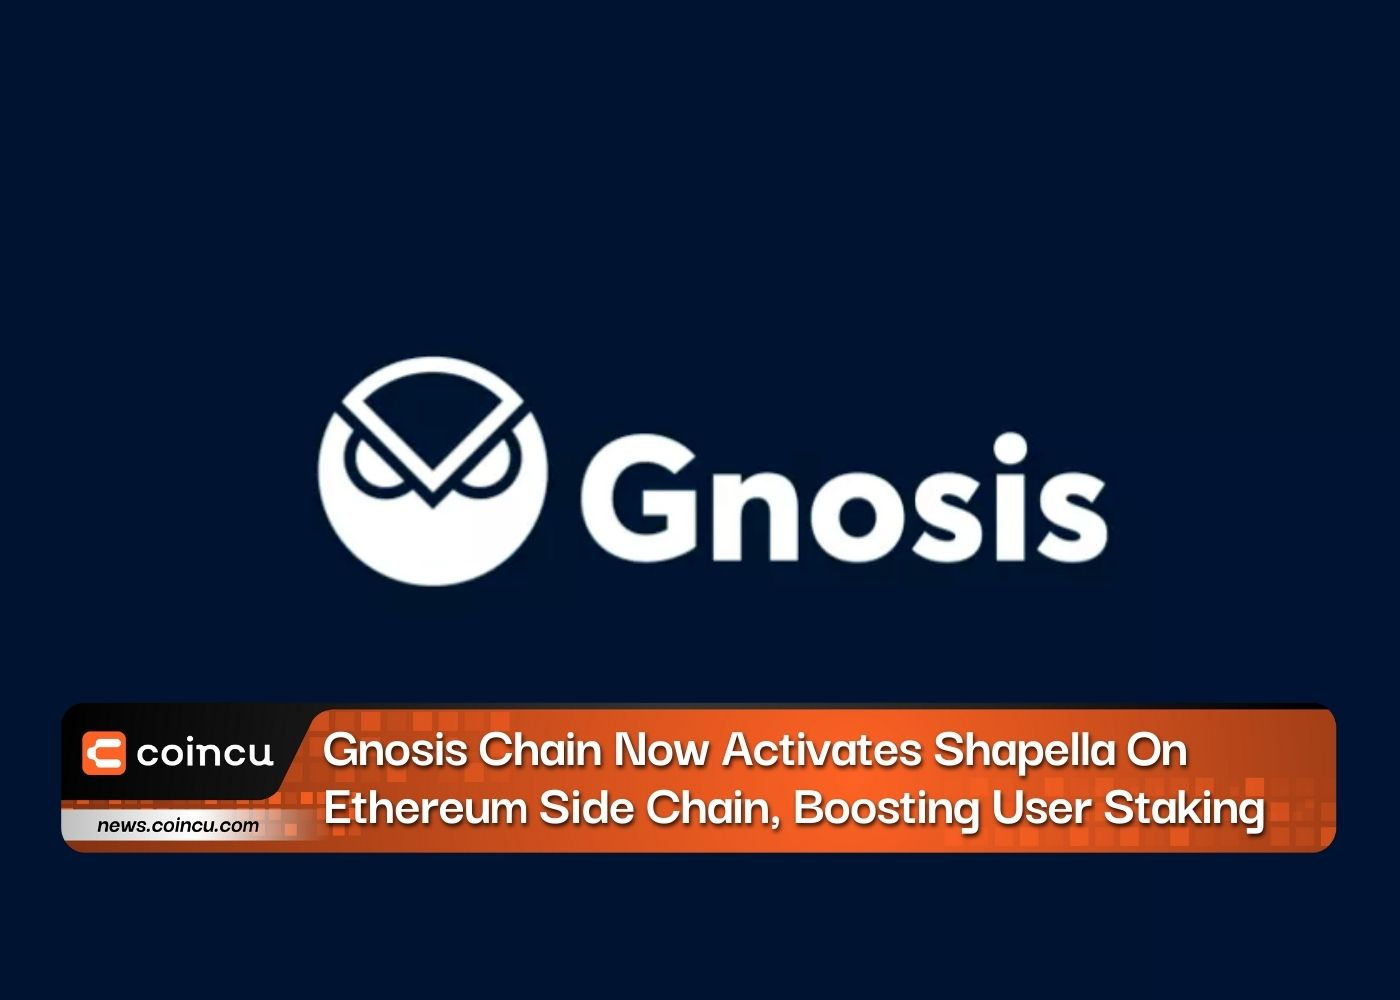 Gnosis Chain Now Activates Shapella On Ethereum Side Chain, Boosting User Staking